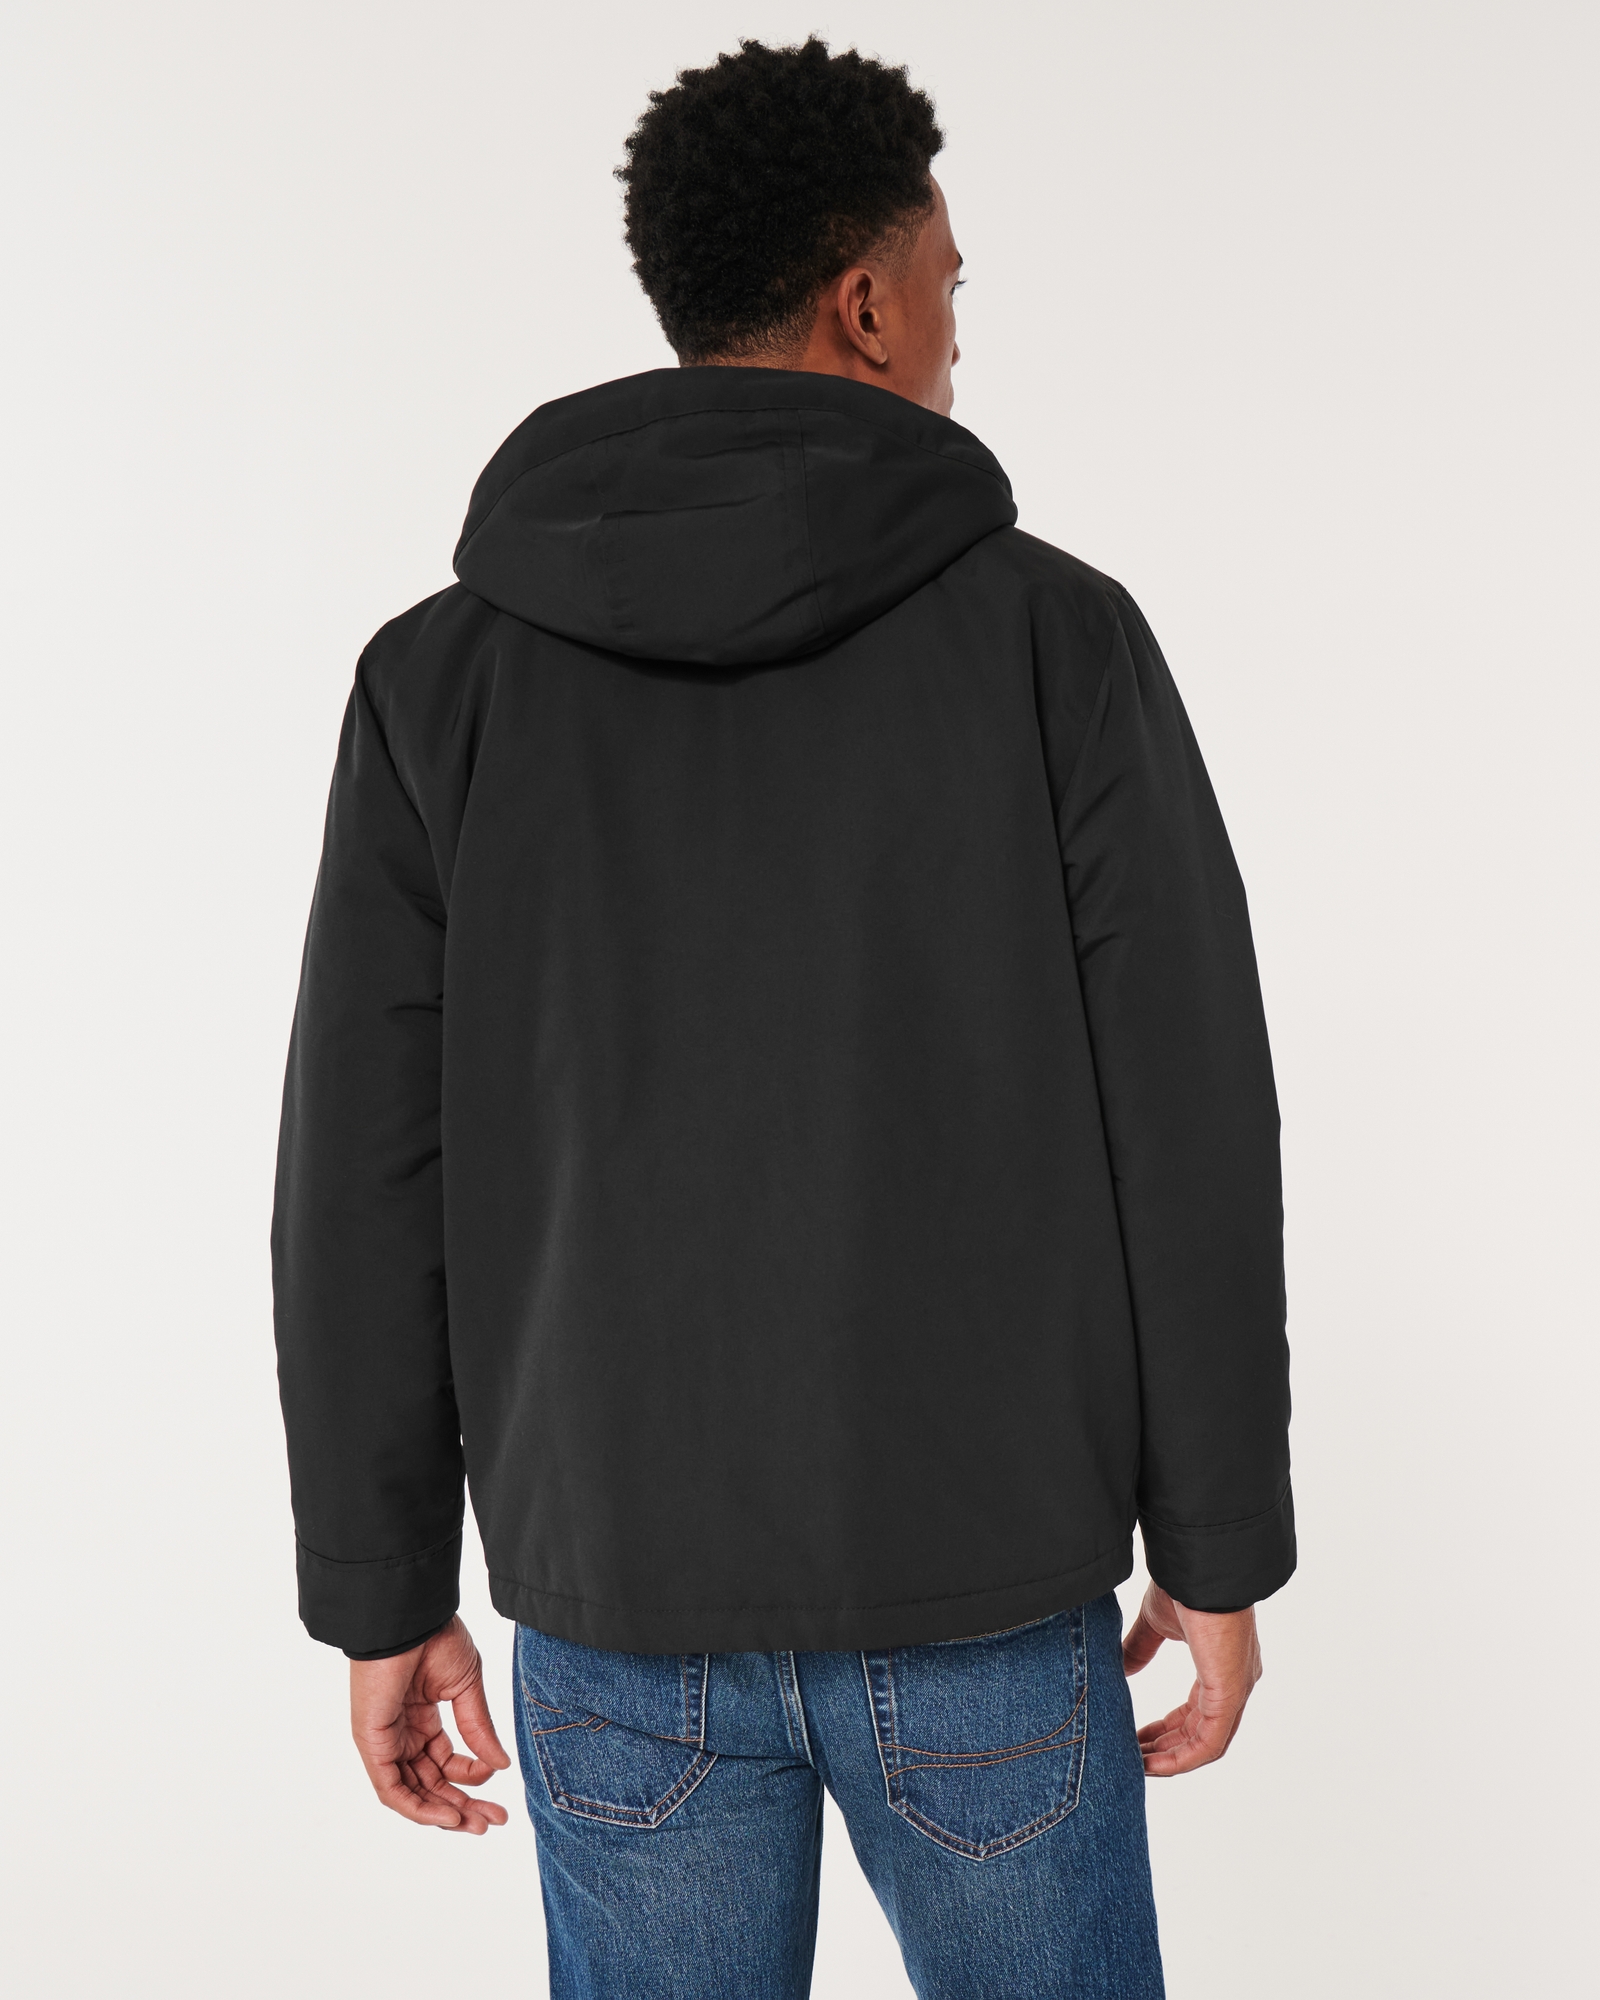 Hollister Co. ALL WEATHER CHAIN - Winter jacket - black 